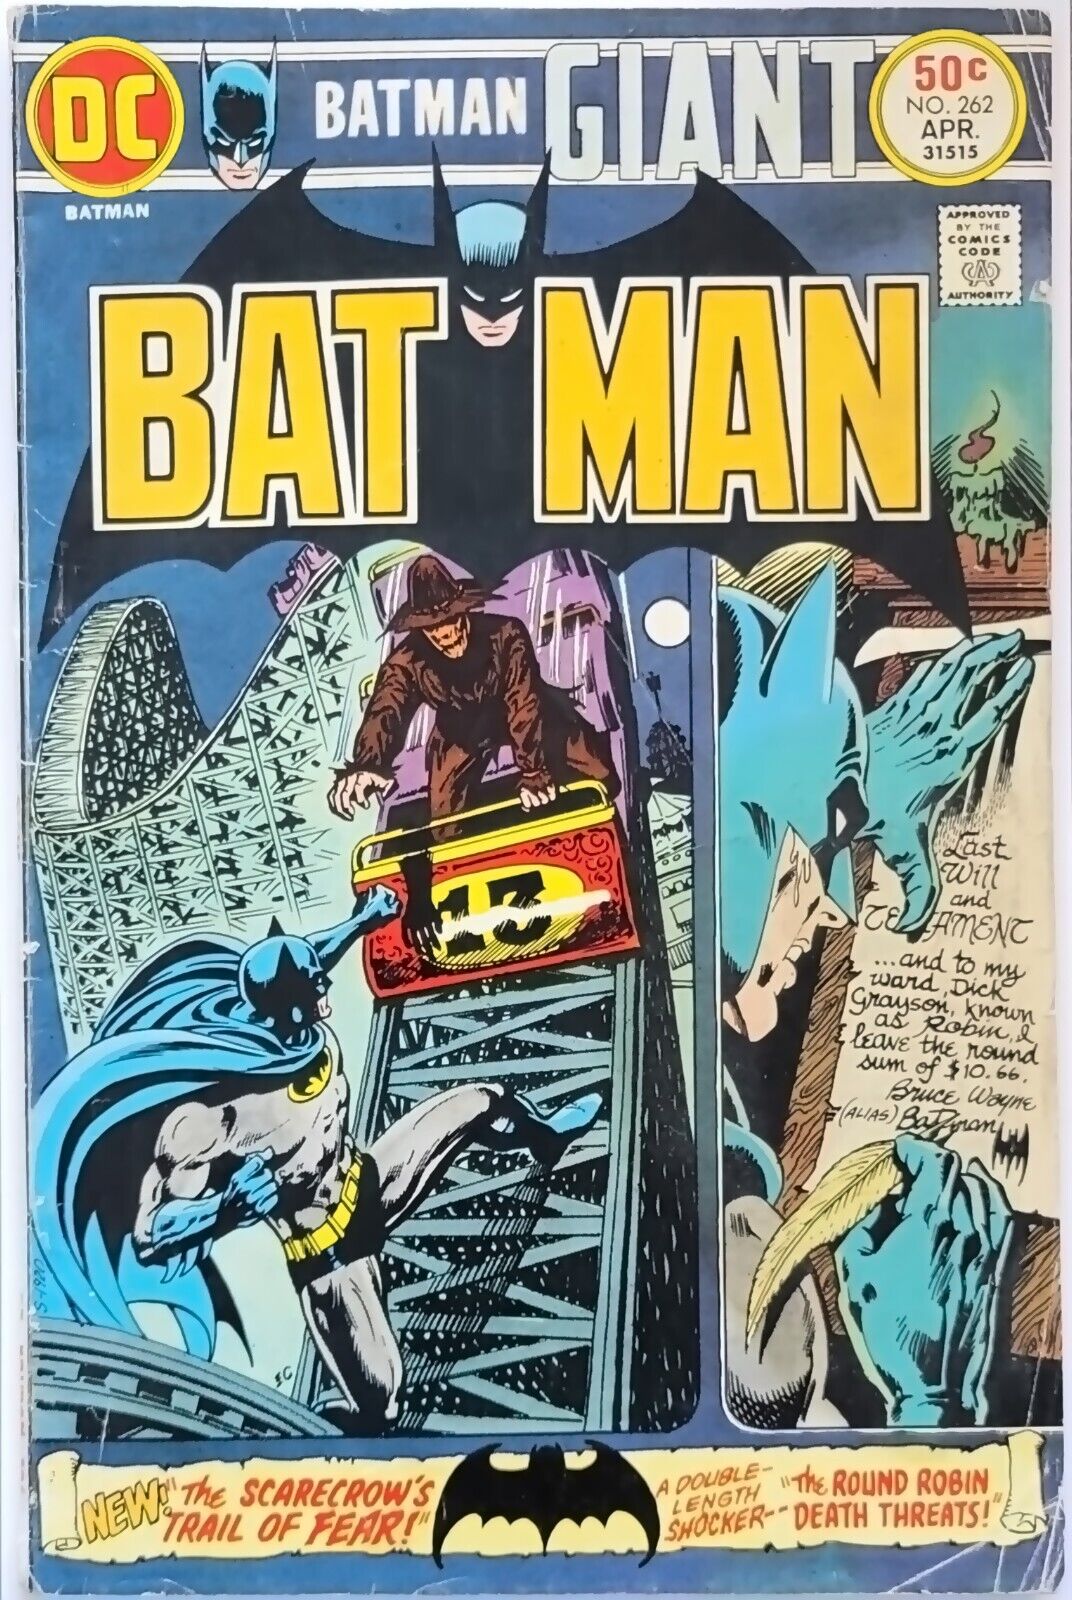 Batman #262 (1975) Vintage Giant-Size Multi-Story Issue Featuring The Scarecrow